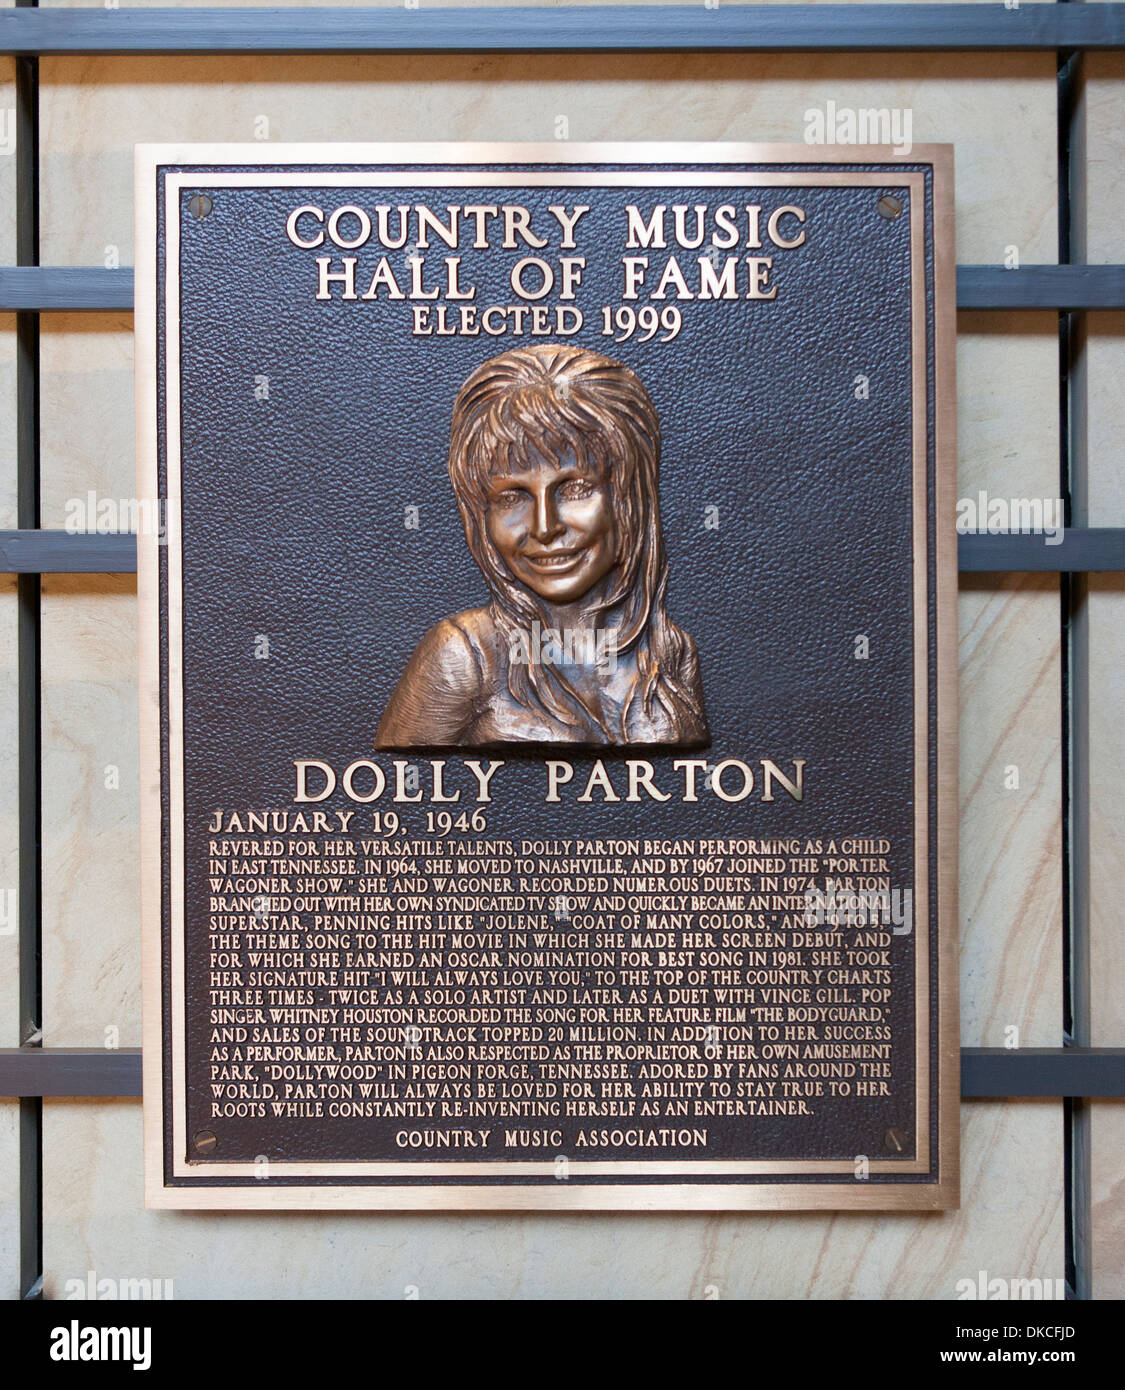 A bronze Dolly Parton Plaque inside the Country Music Hall of Fame in Nashville, TN, USA Stock Photo